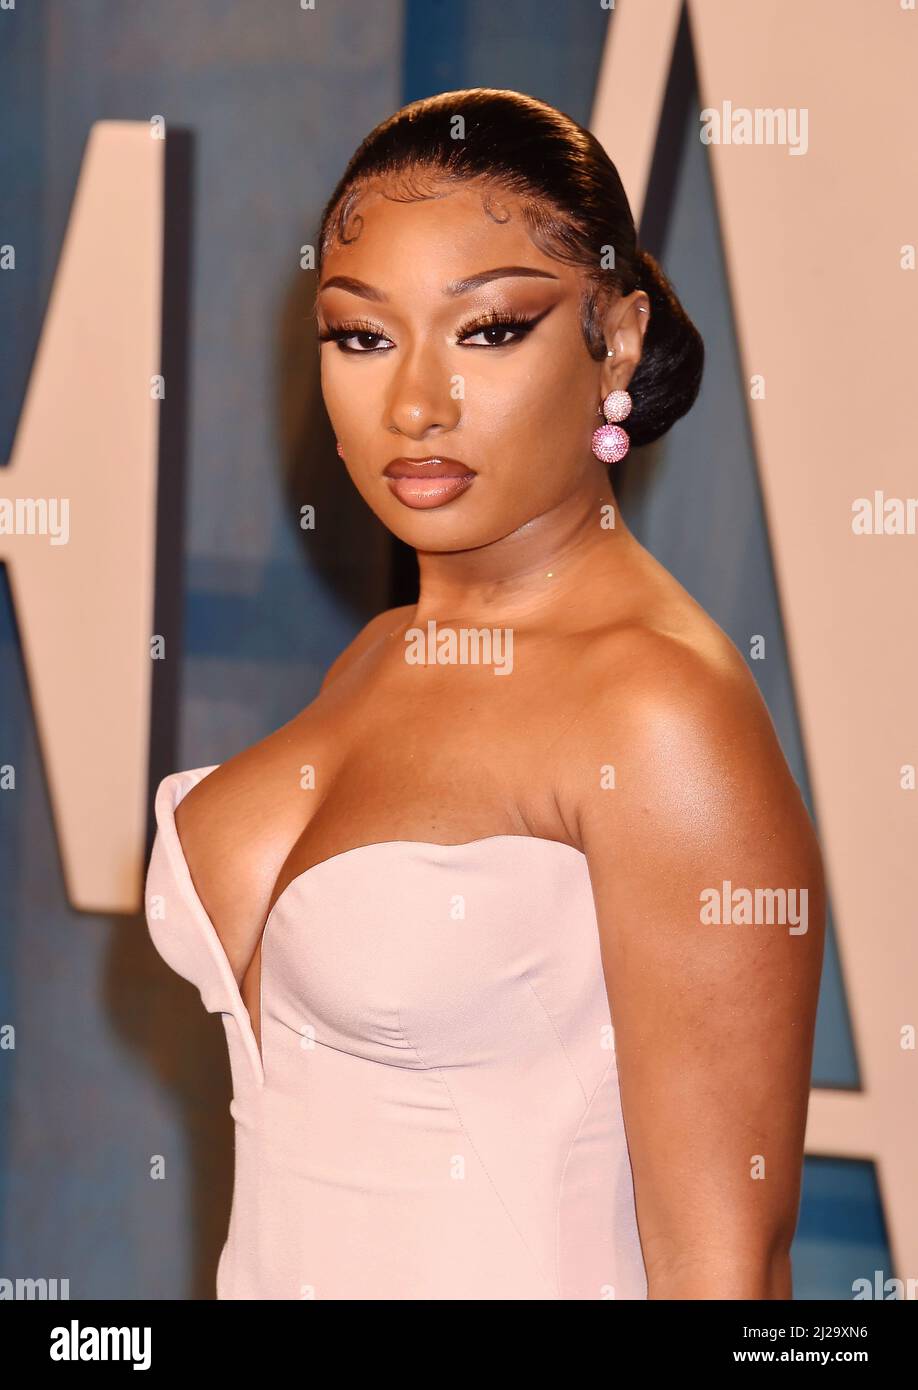 BEVERLY HILLS, CA MARCH 27 Megan Thee Stallion attends the 2022